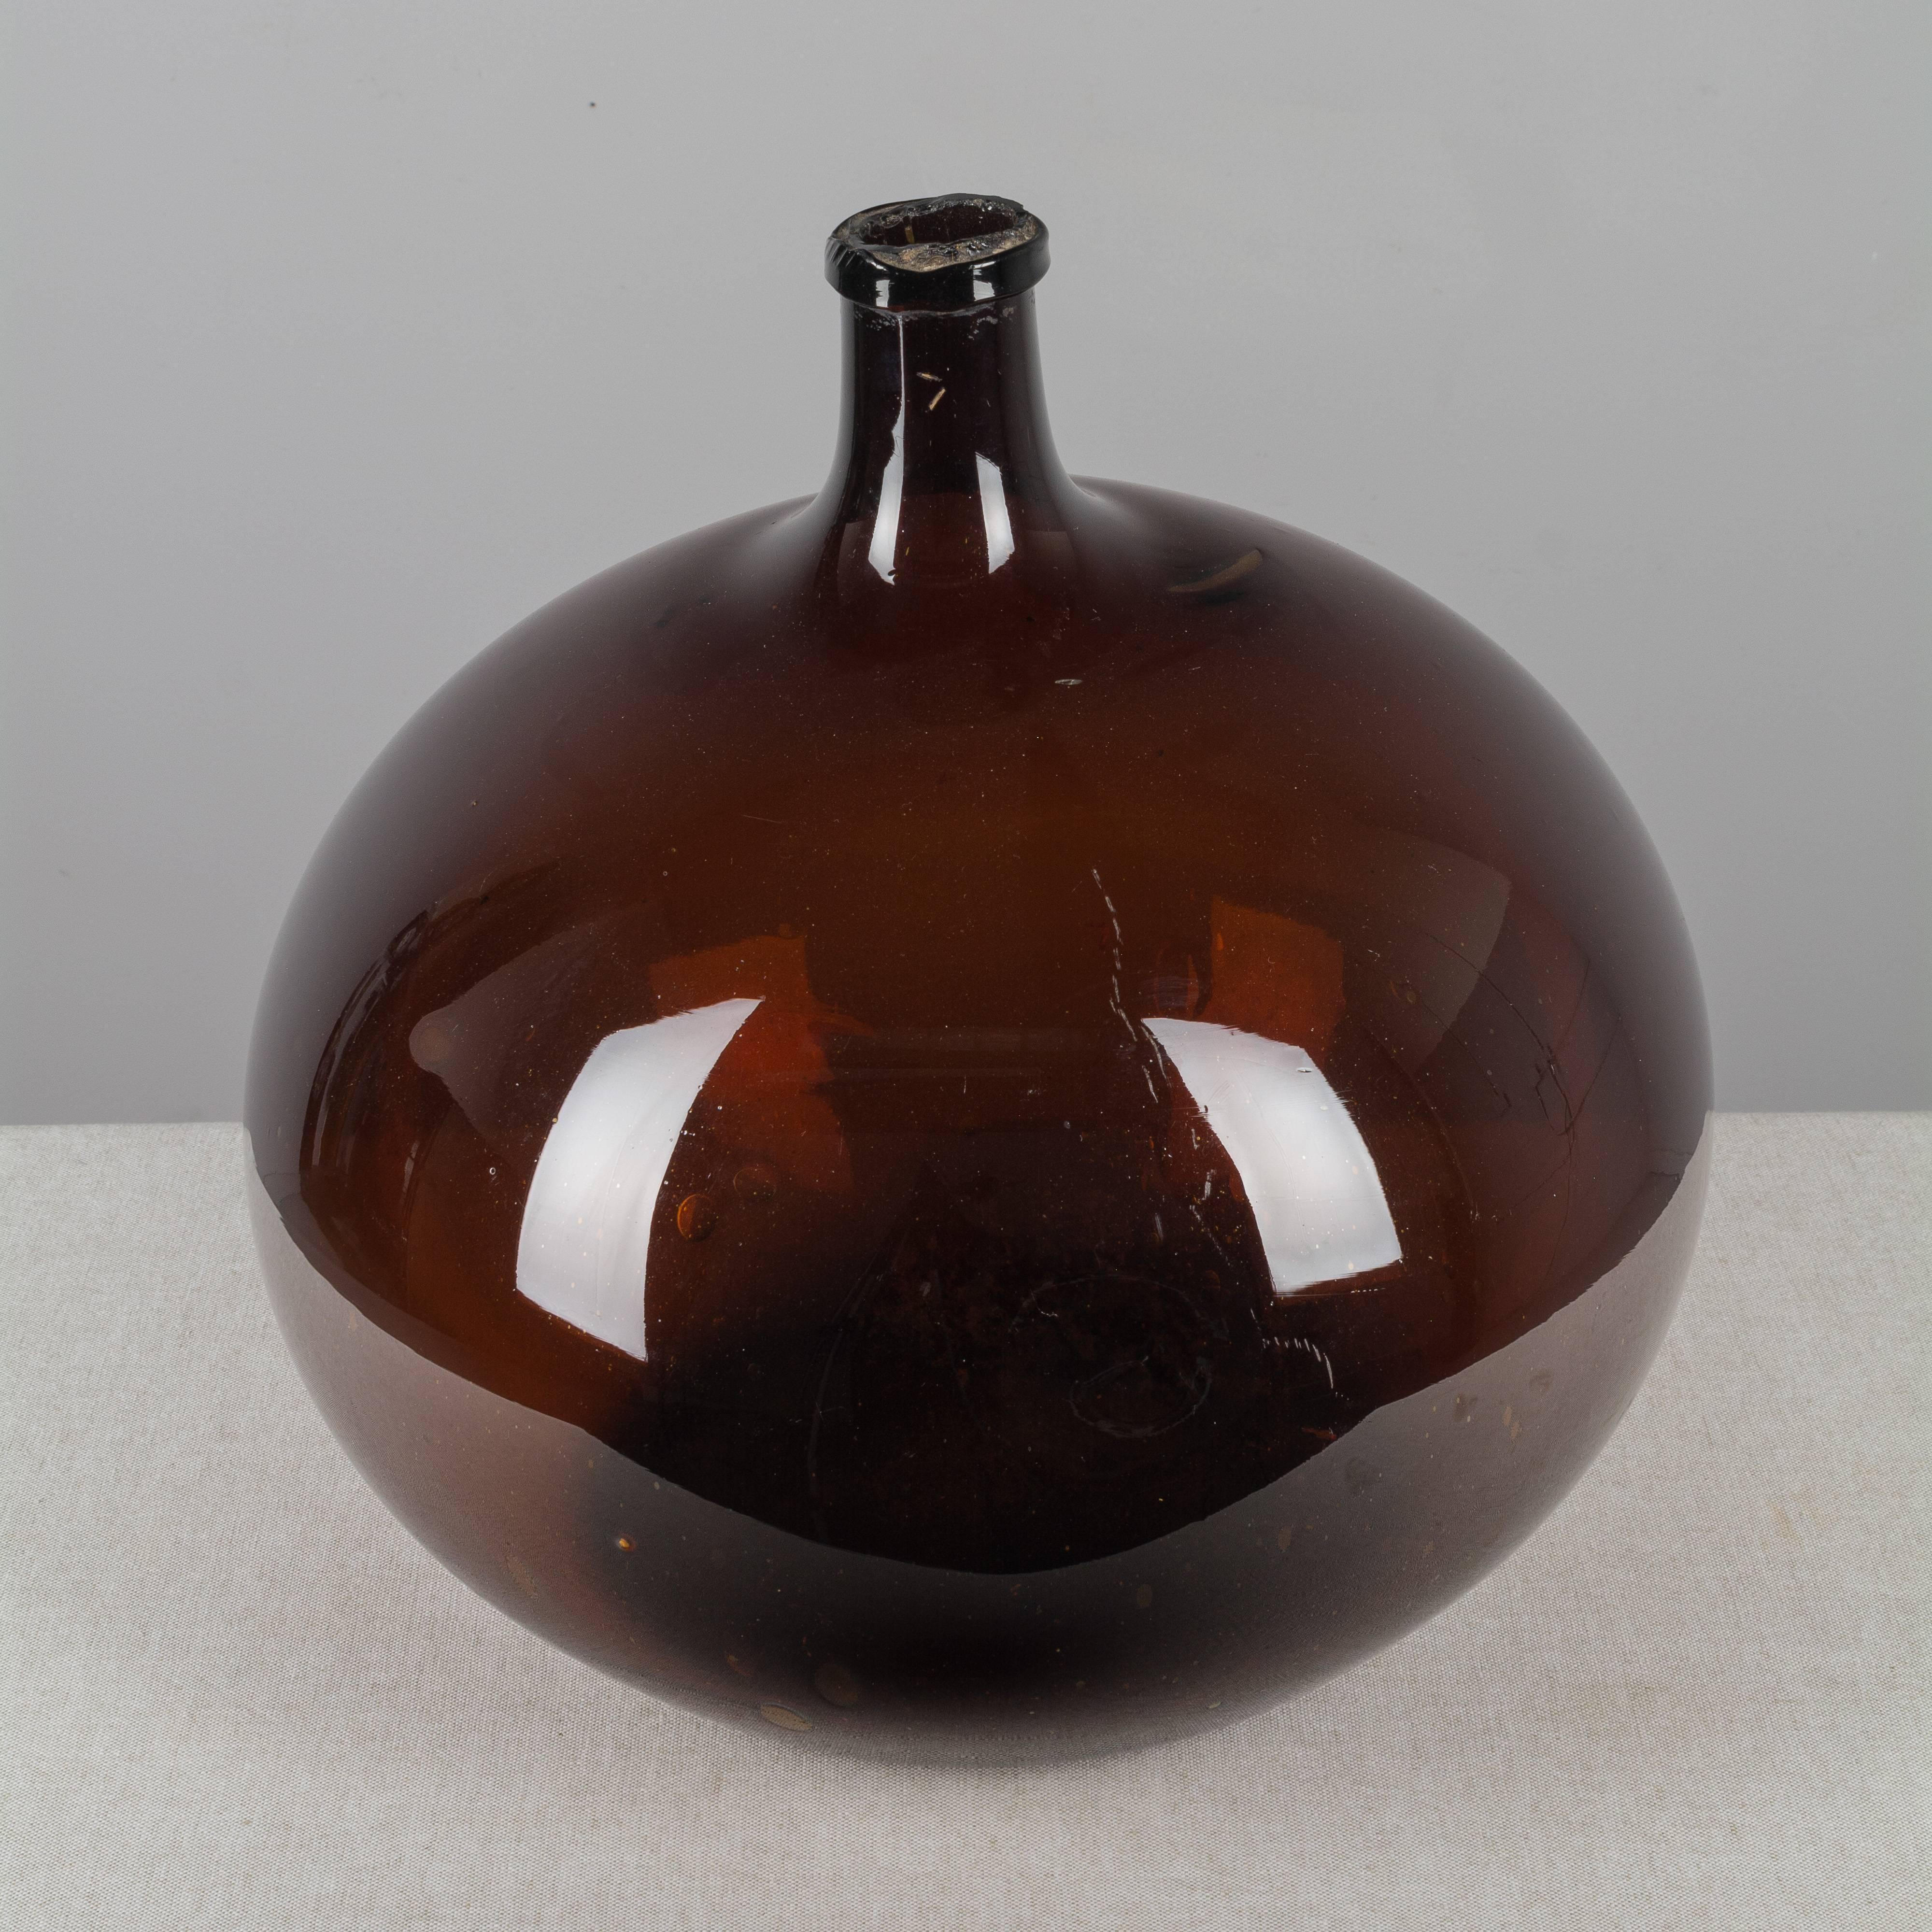 French Provincial 19th Century French Blown Glass Demijohn Bottle